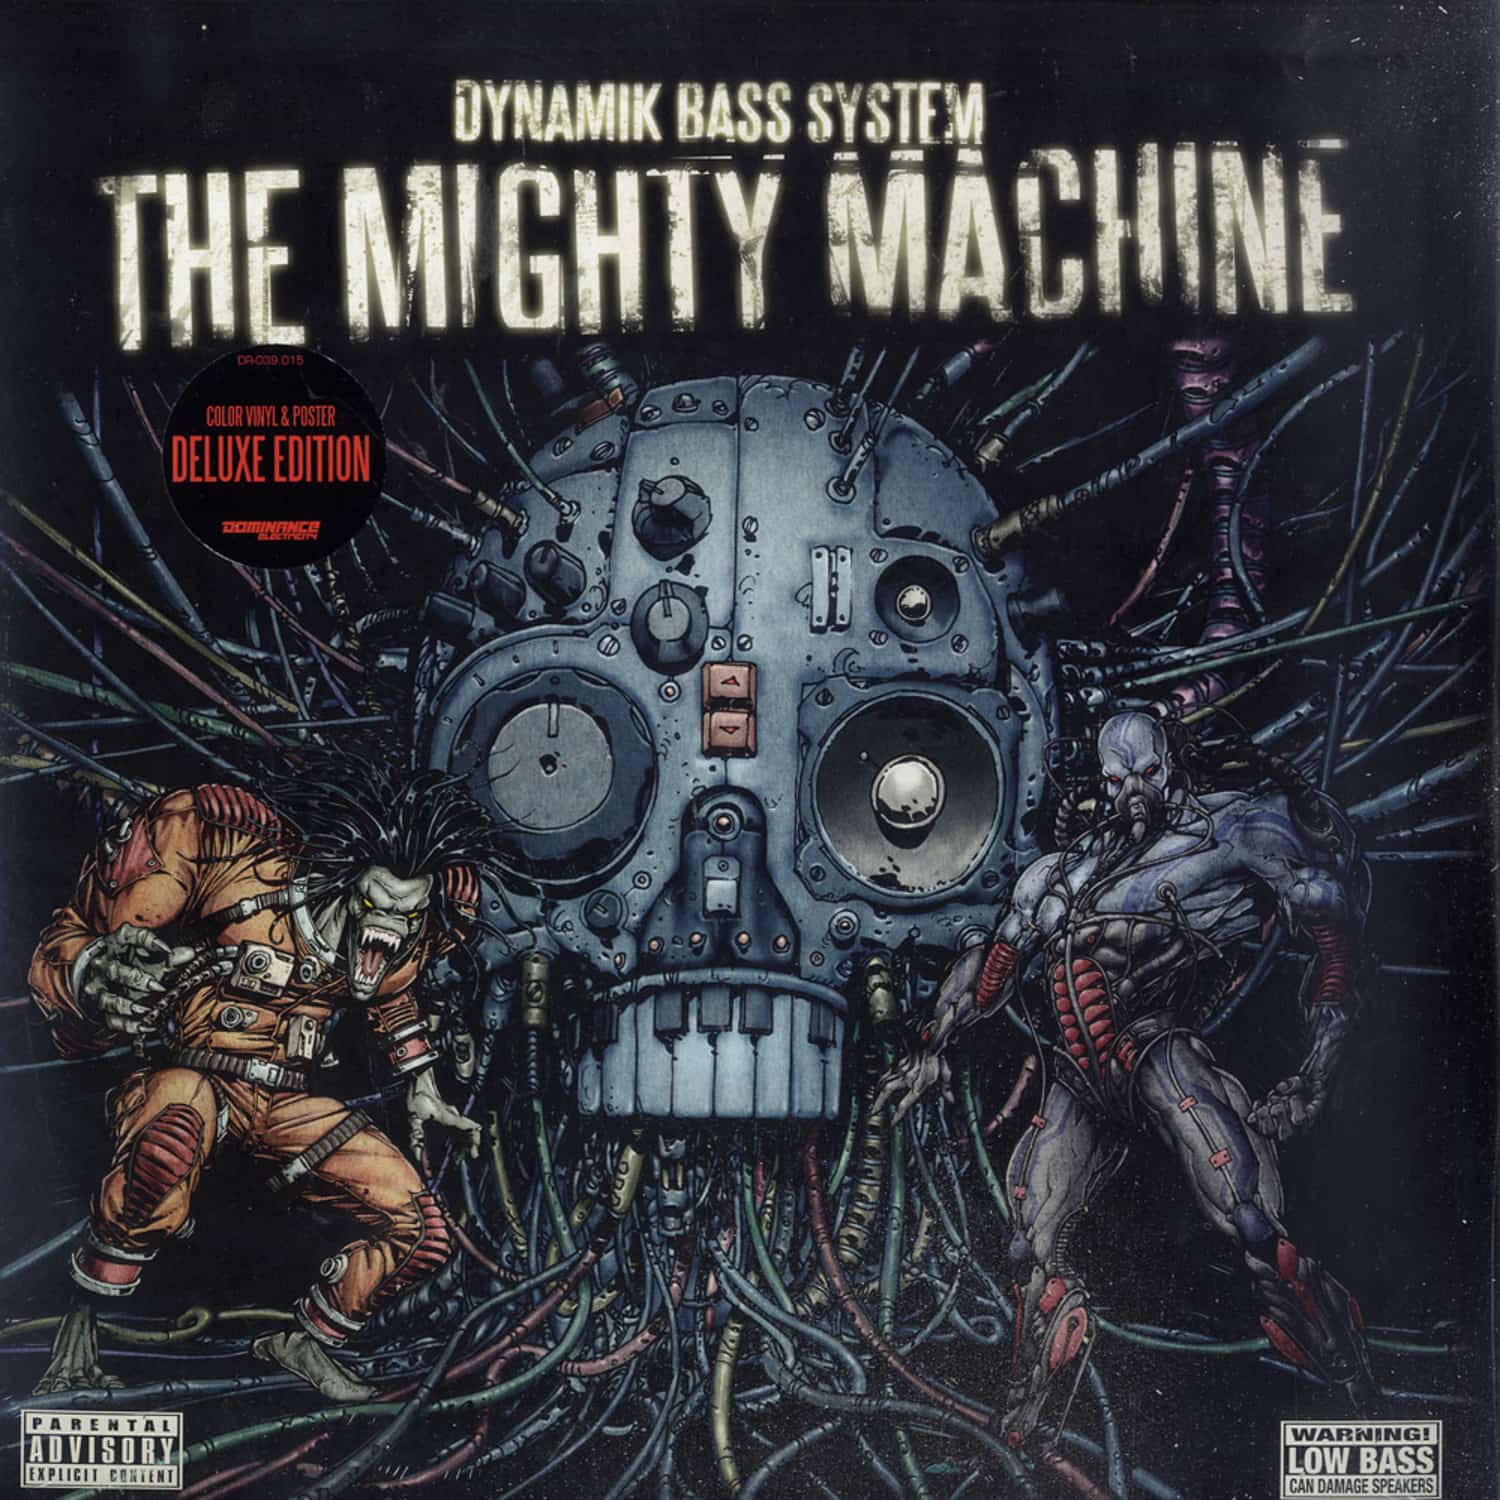 Dynamik Bass System - THE MIGHTY MACHINE 